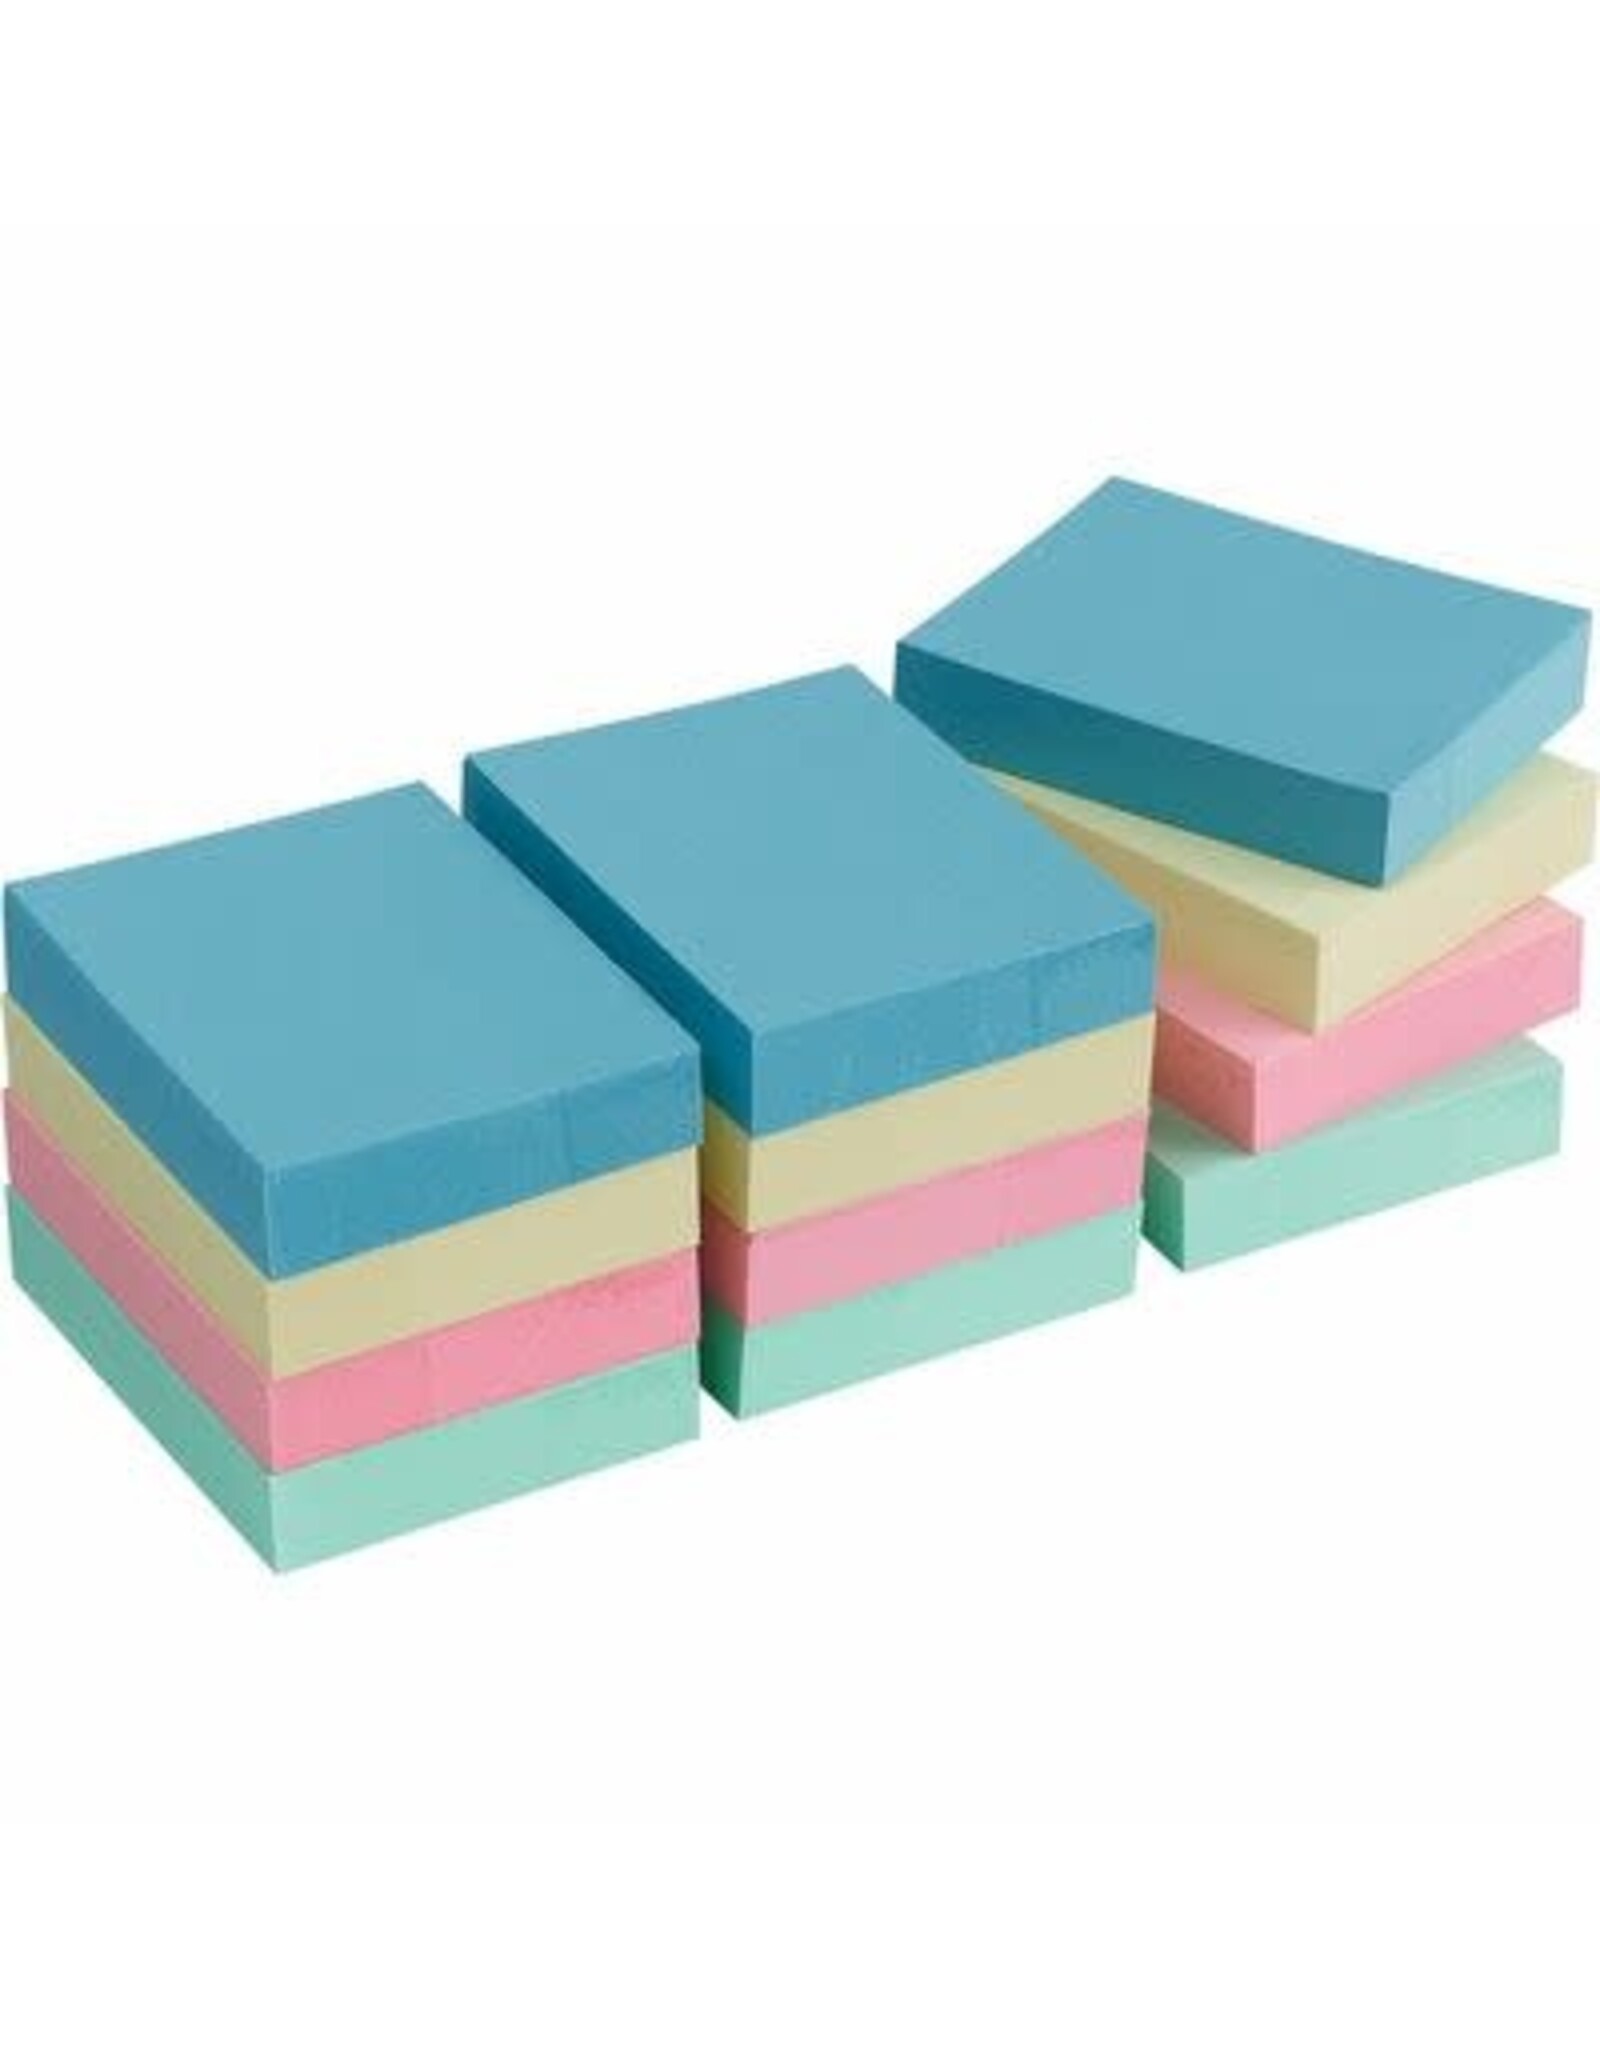 BUSINNESS SOURCE STICKY NOTES  PASTEL COLORS 1-3/8"x1-7/8" - 12 PADS ( 1,200 SHEETS )